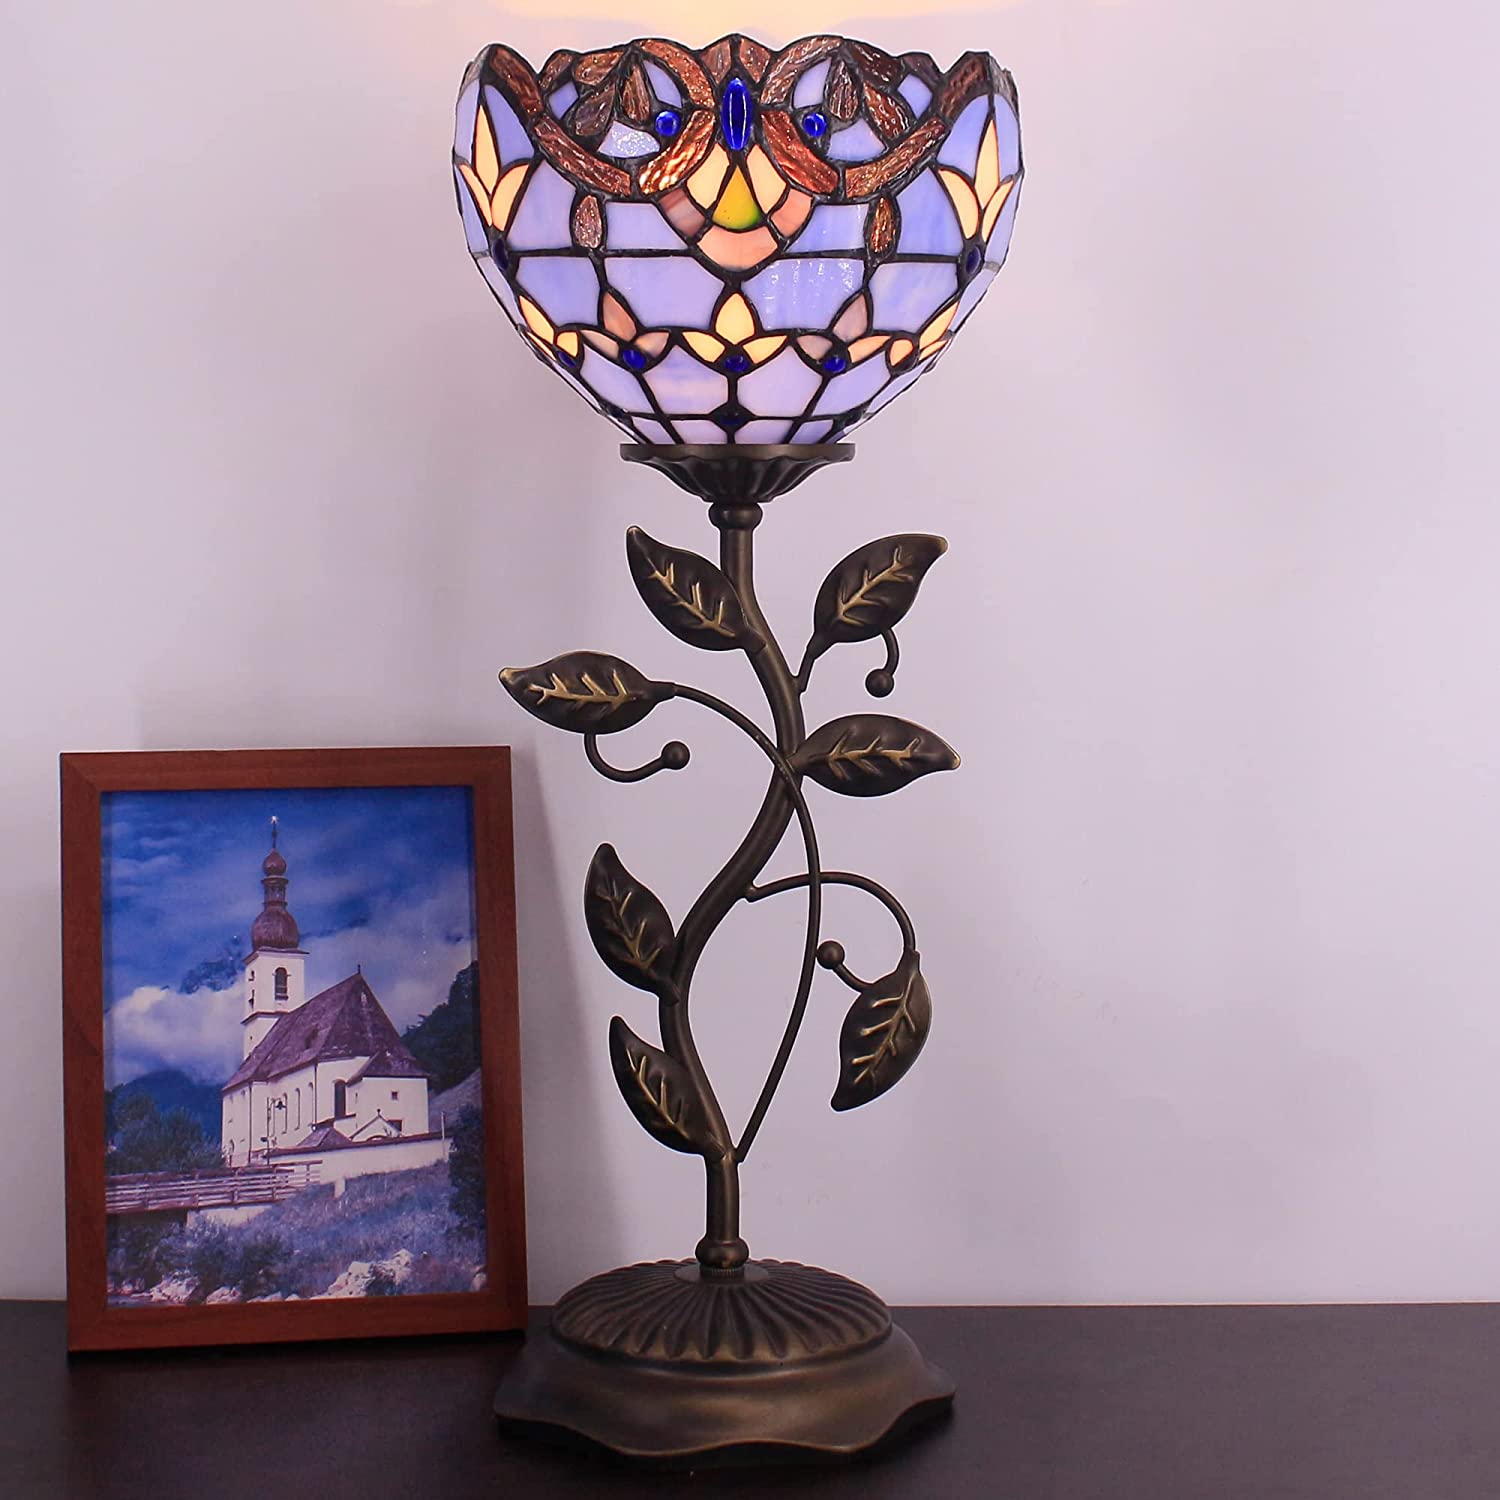 WERFACTORY Small Tiffany Table Lamp 8" Stained Glass Baroque Style Shade 19" Tall Antique Vintage Metal Leaf Base Mini Bedside Accent Desk Torchiere Uplight